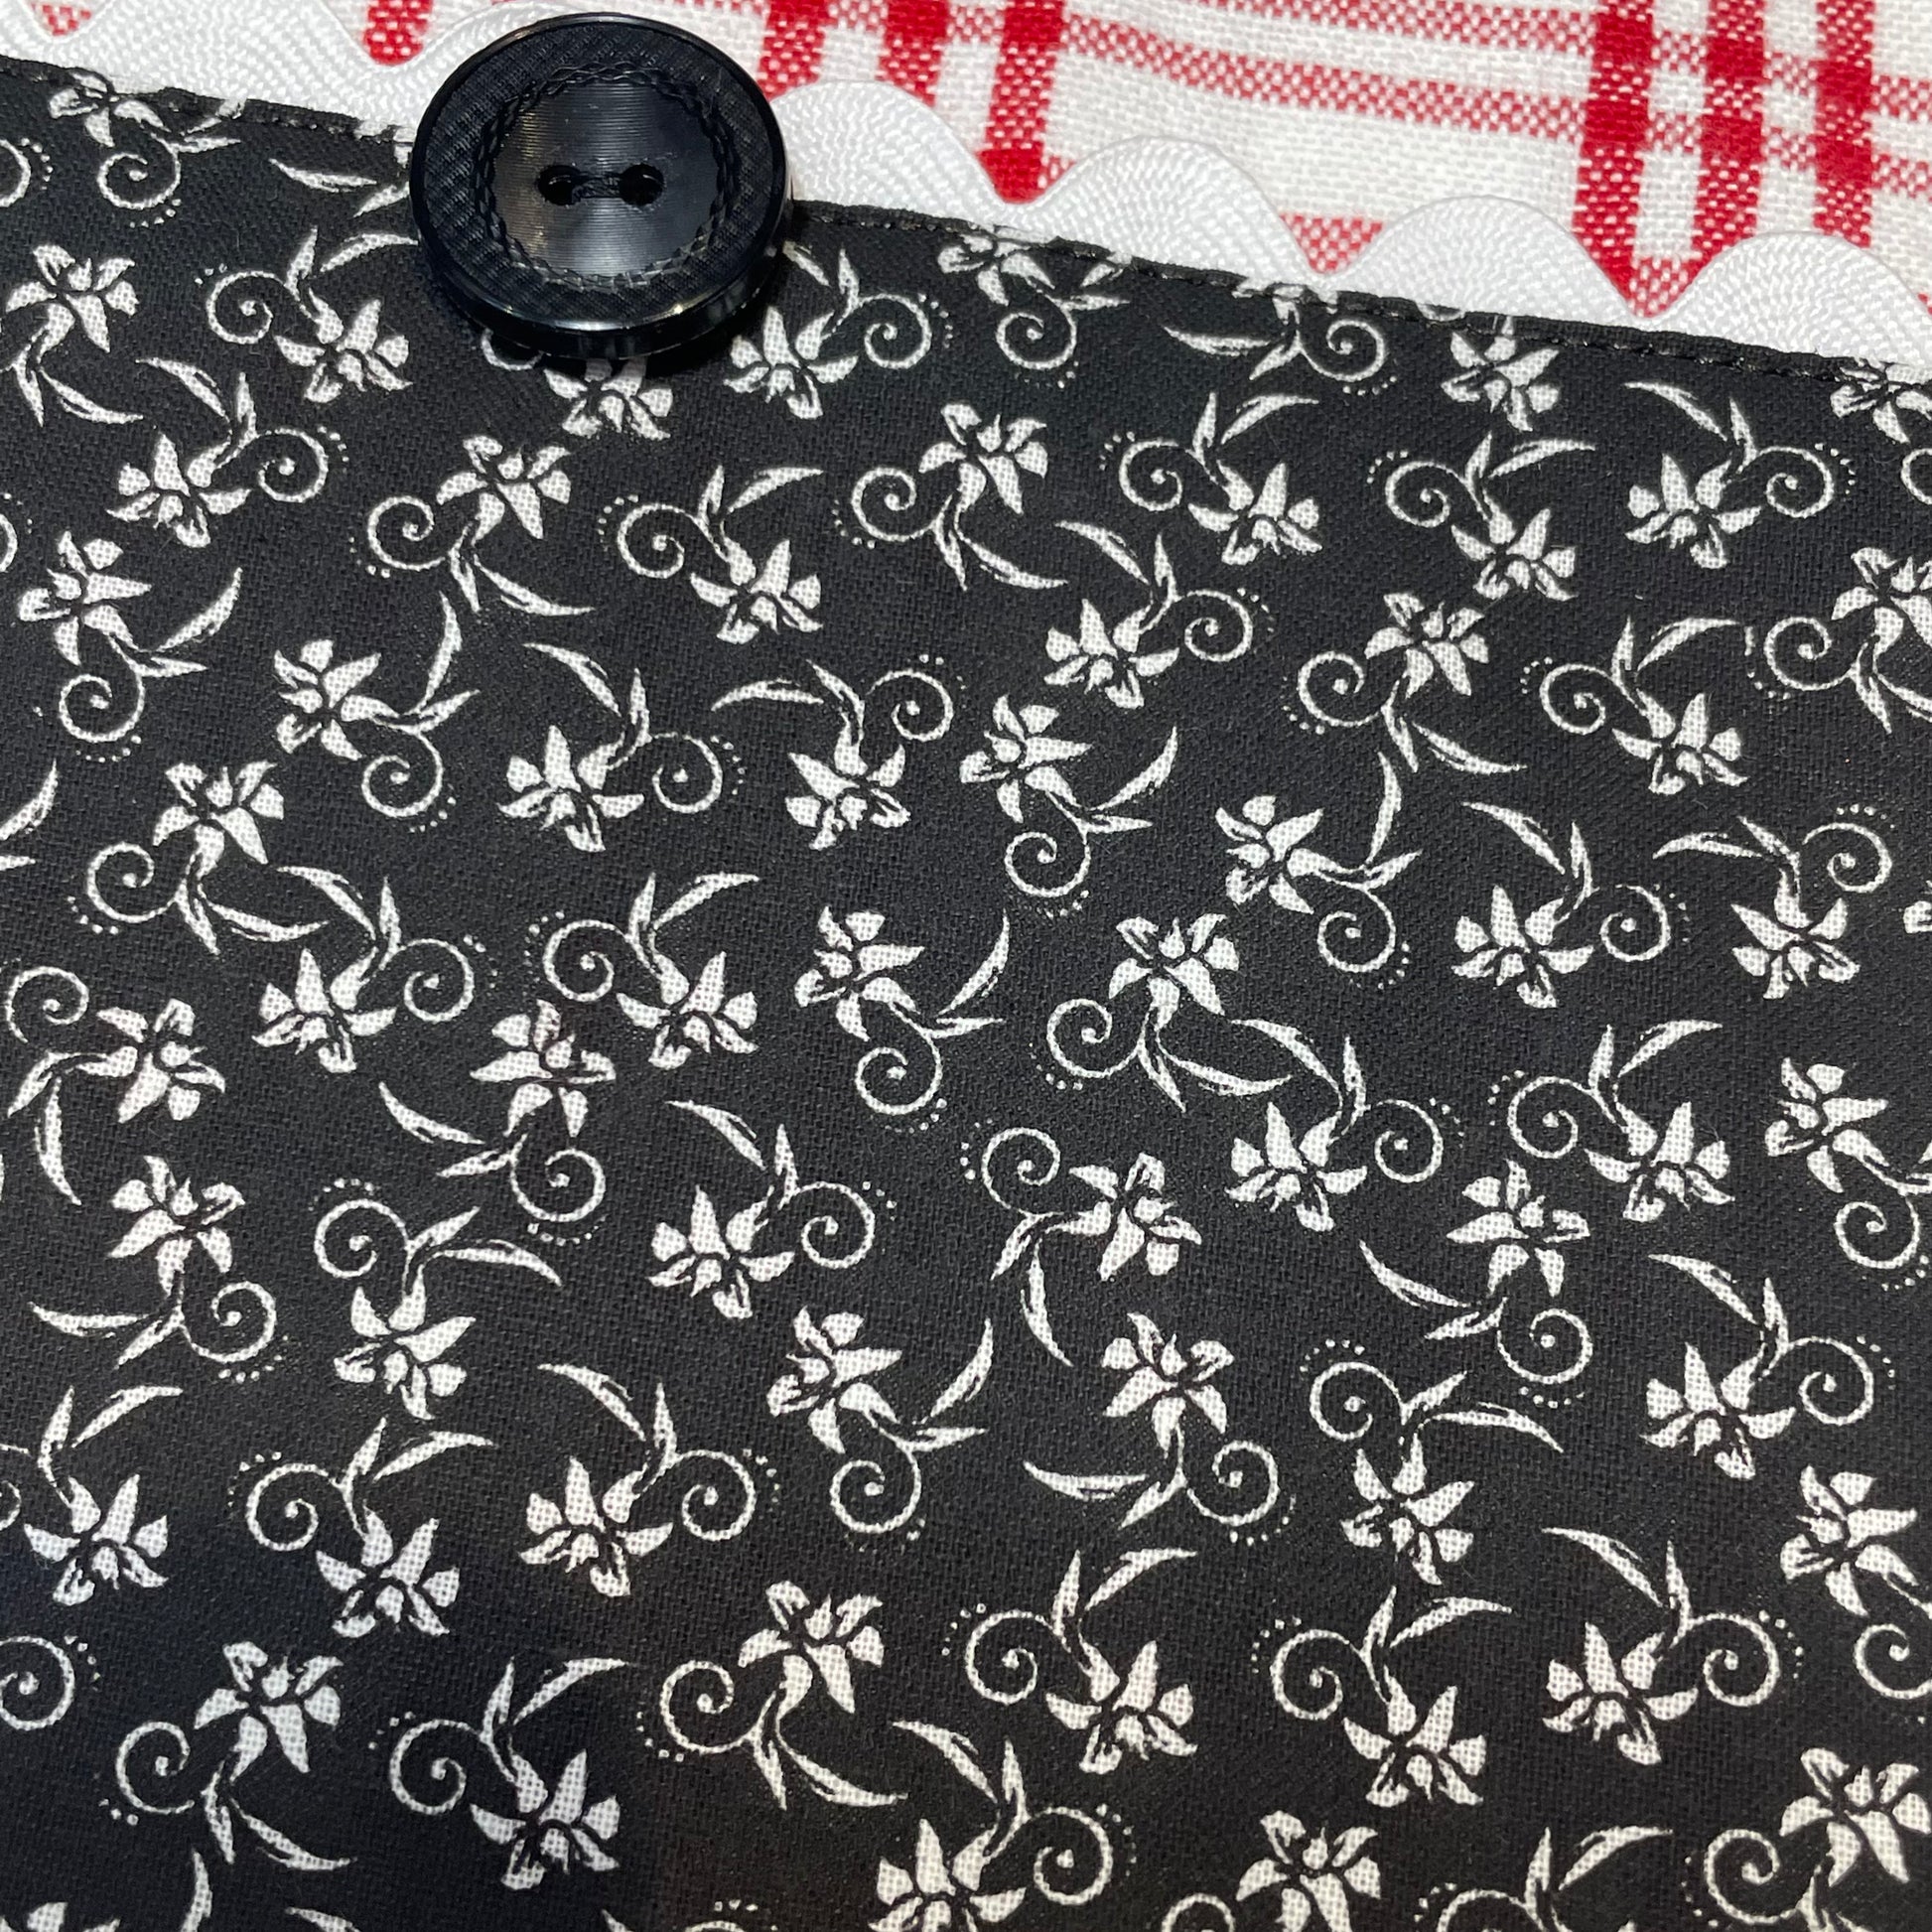 Country Style Dish Towel in Red and White check toweling with black and red quilting cotton. Featuring Black Ric Rac and button embellishments. Part of a mix and match line of farmhouse fabulous decor. Browse the entire collection. Then check out the Home Stitchery Decor YouTube Channel